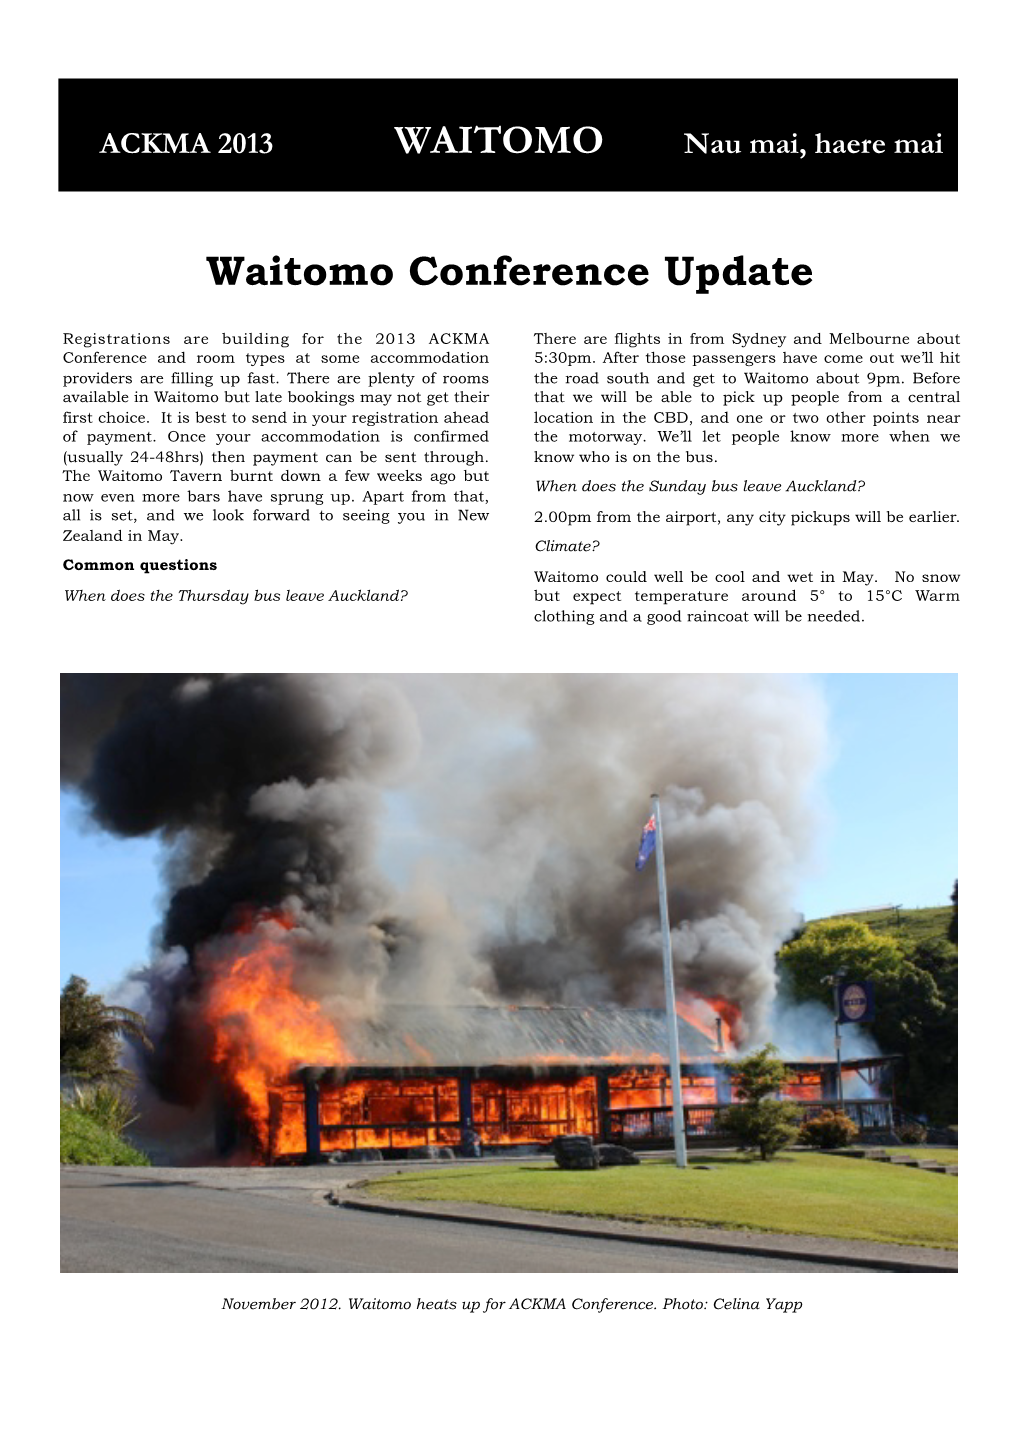 Waitomo Conference Update